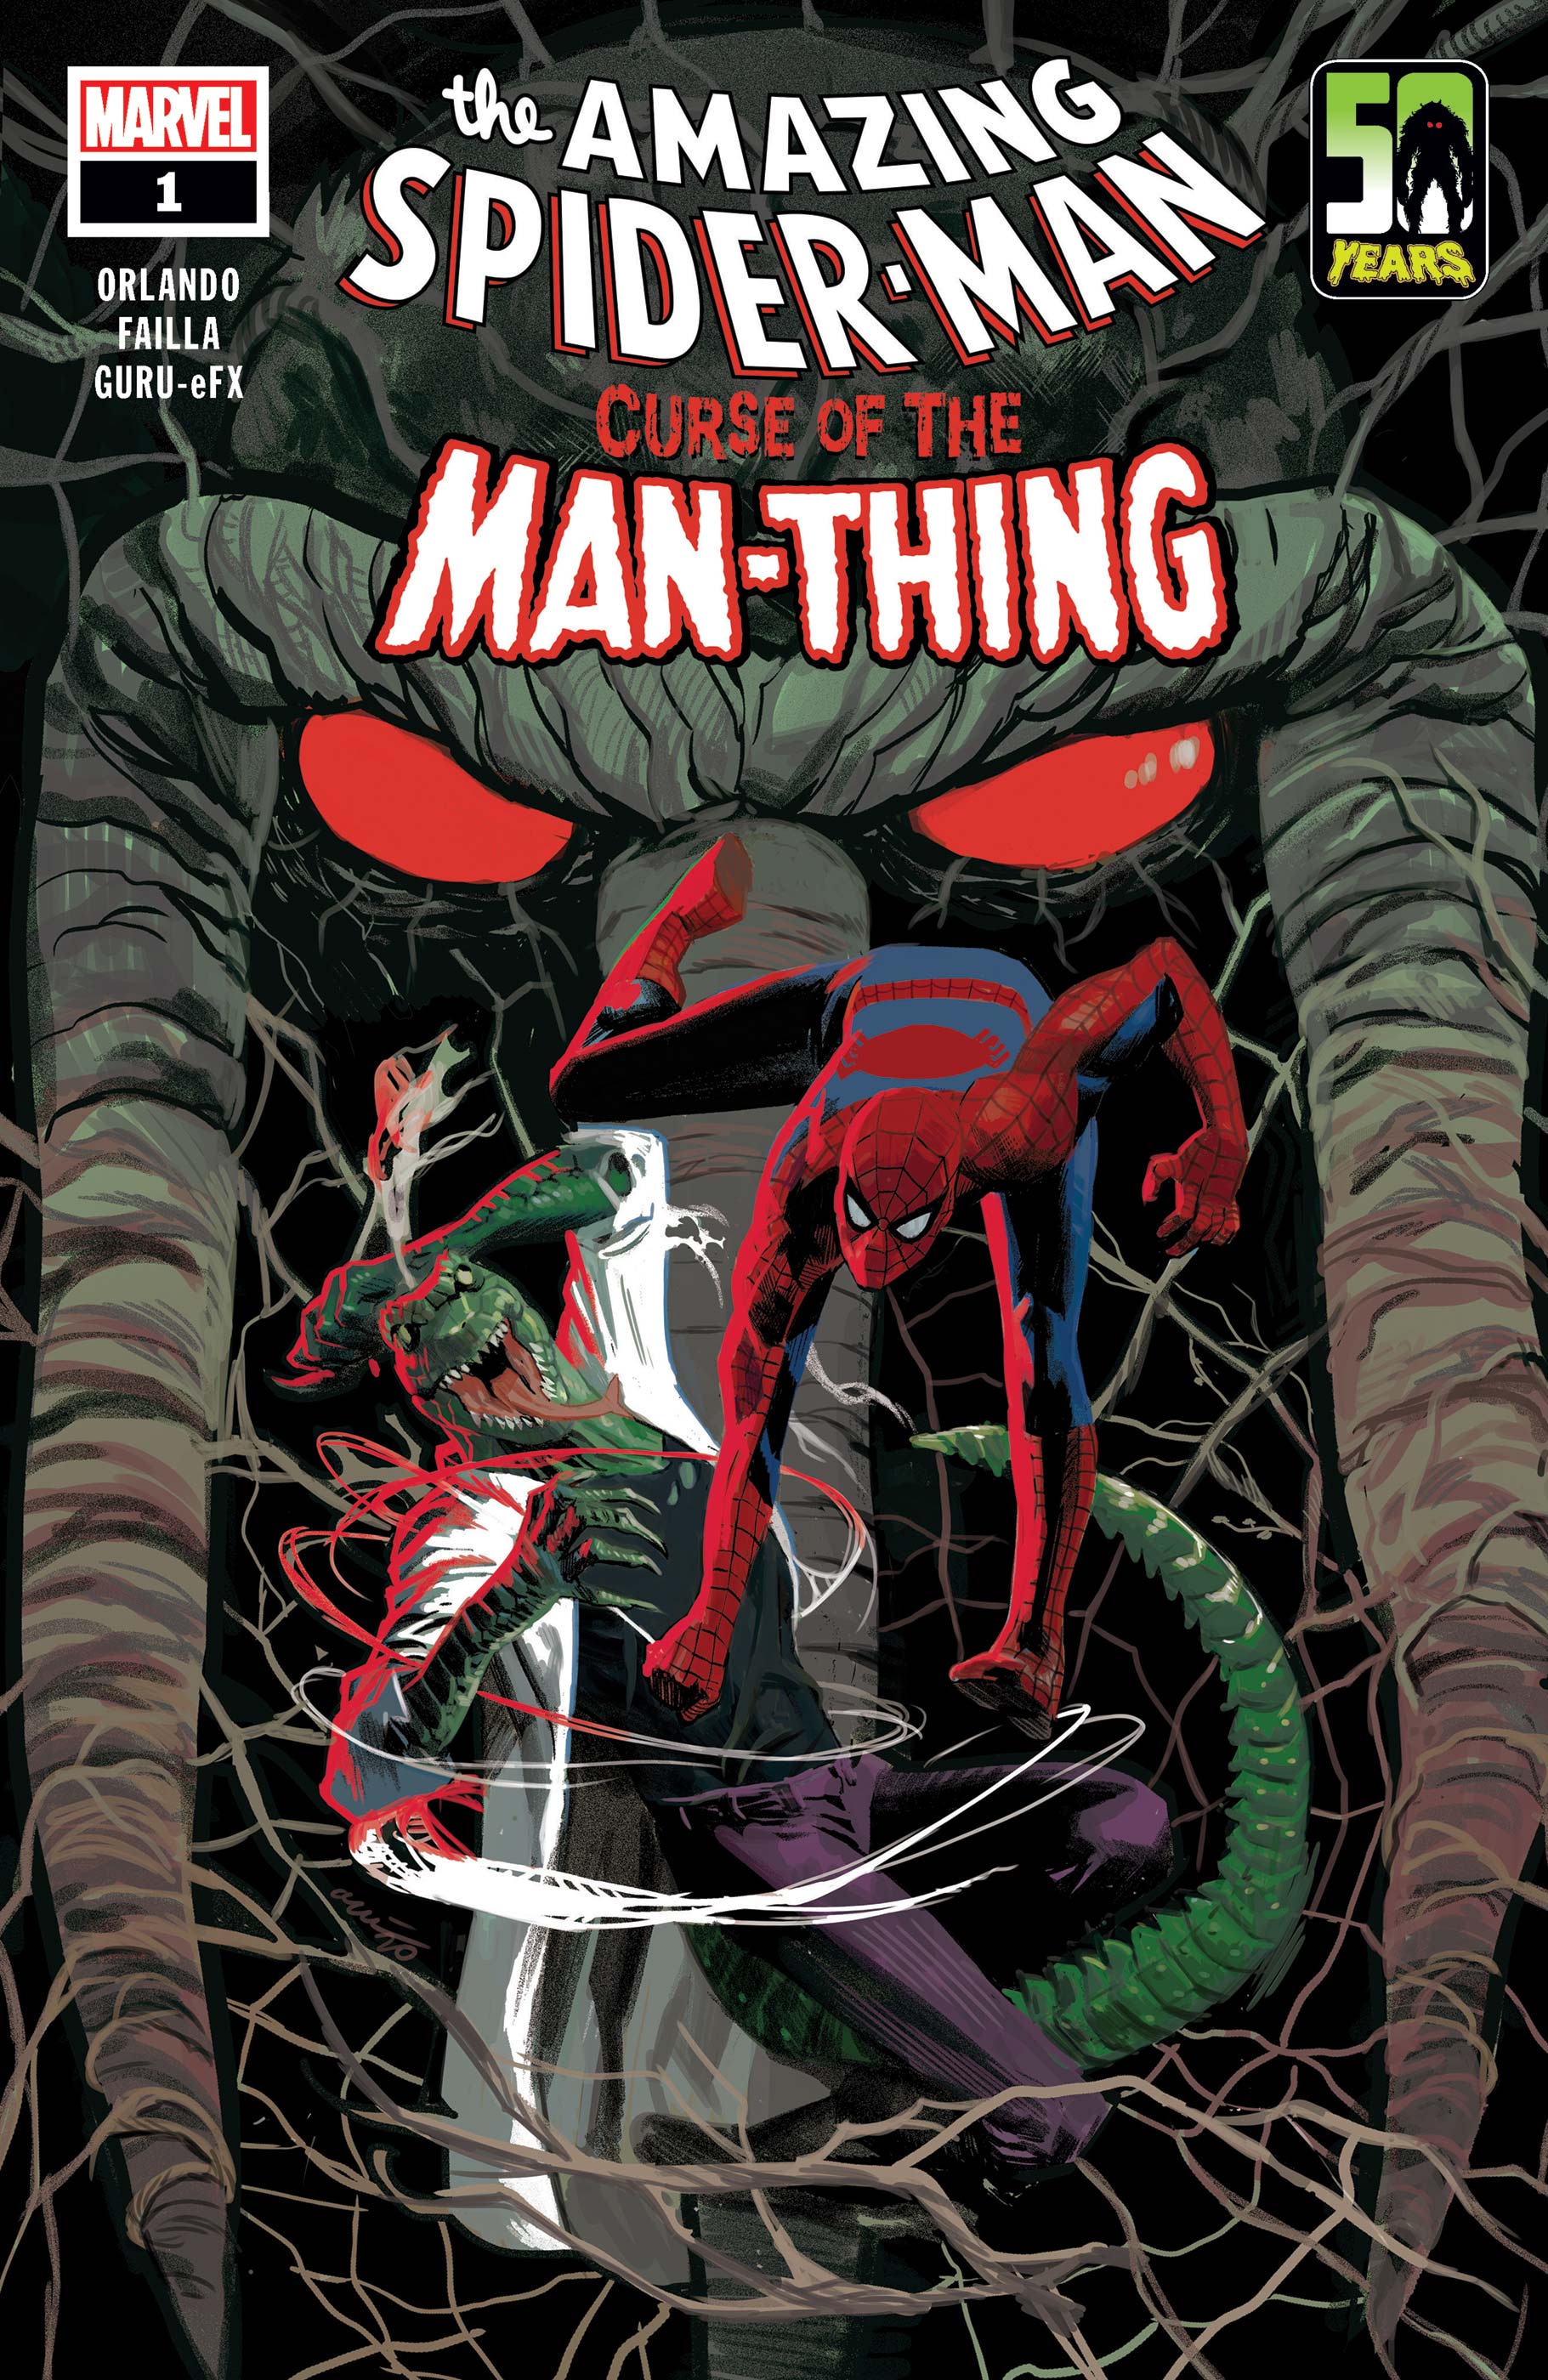 Spider-Man: Curse of the Man-Thing (2021) #1